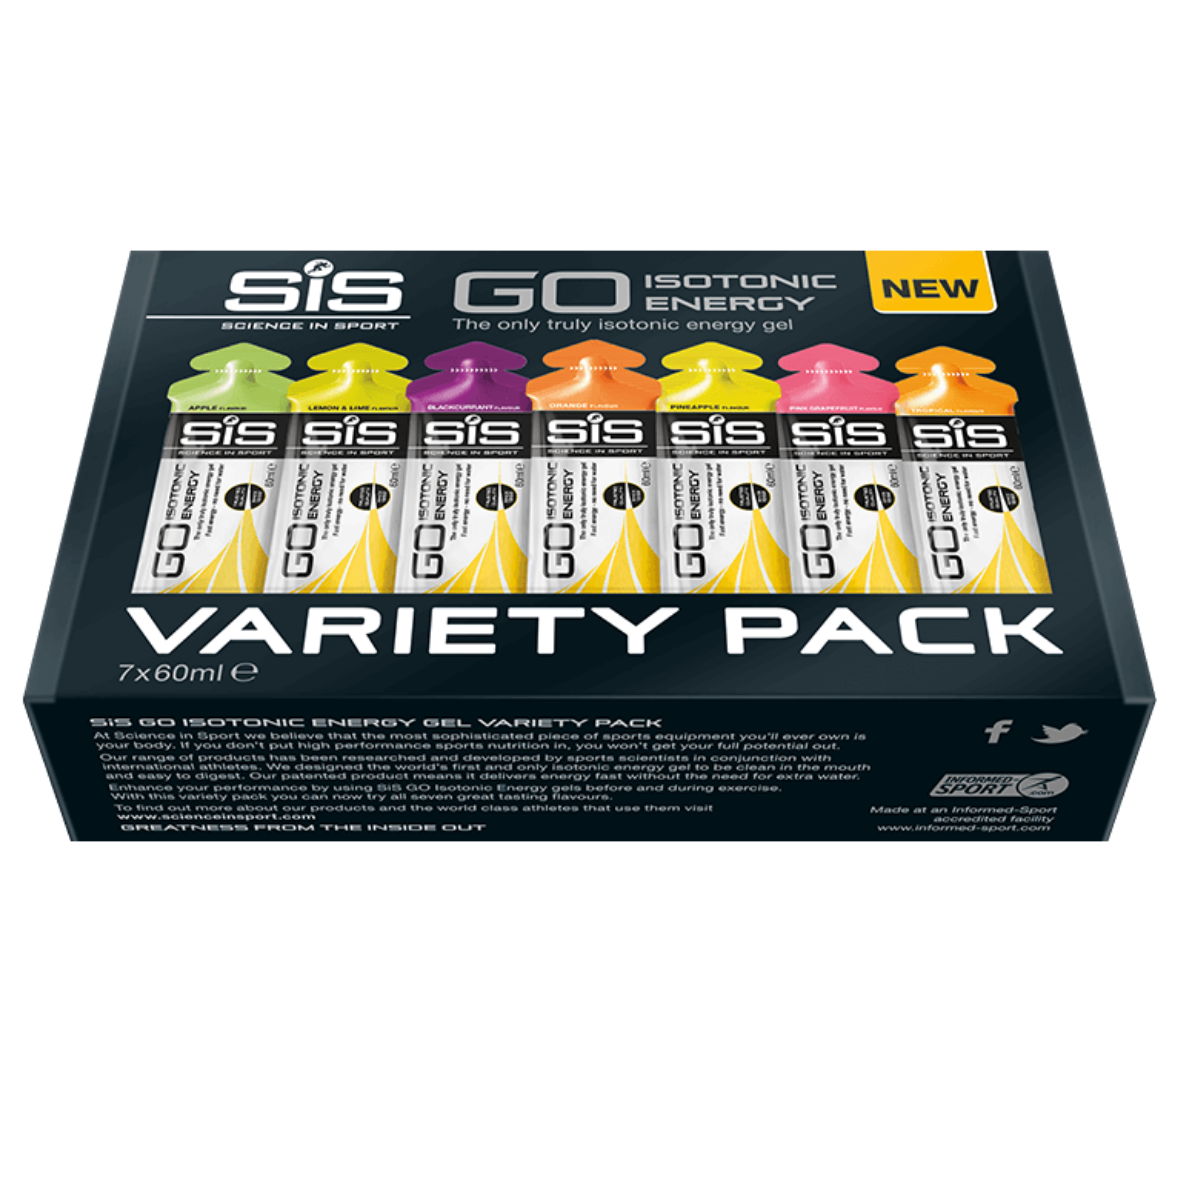 Science In Sport mixed Isotonic Energy Gels 7 pack